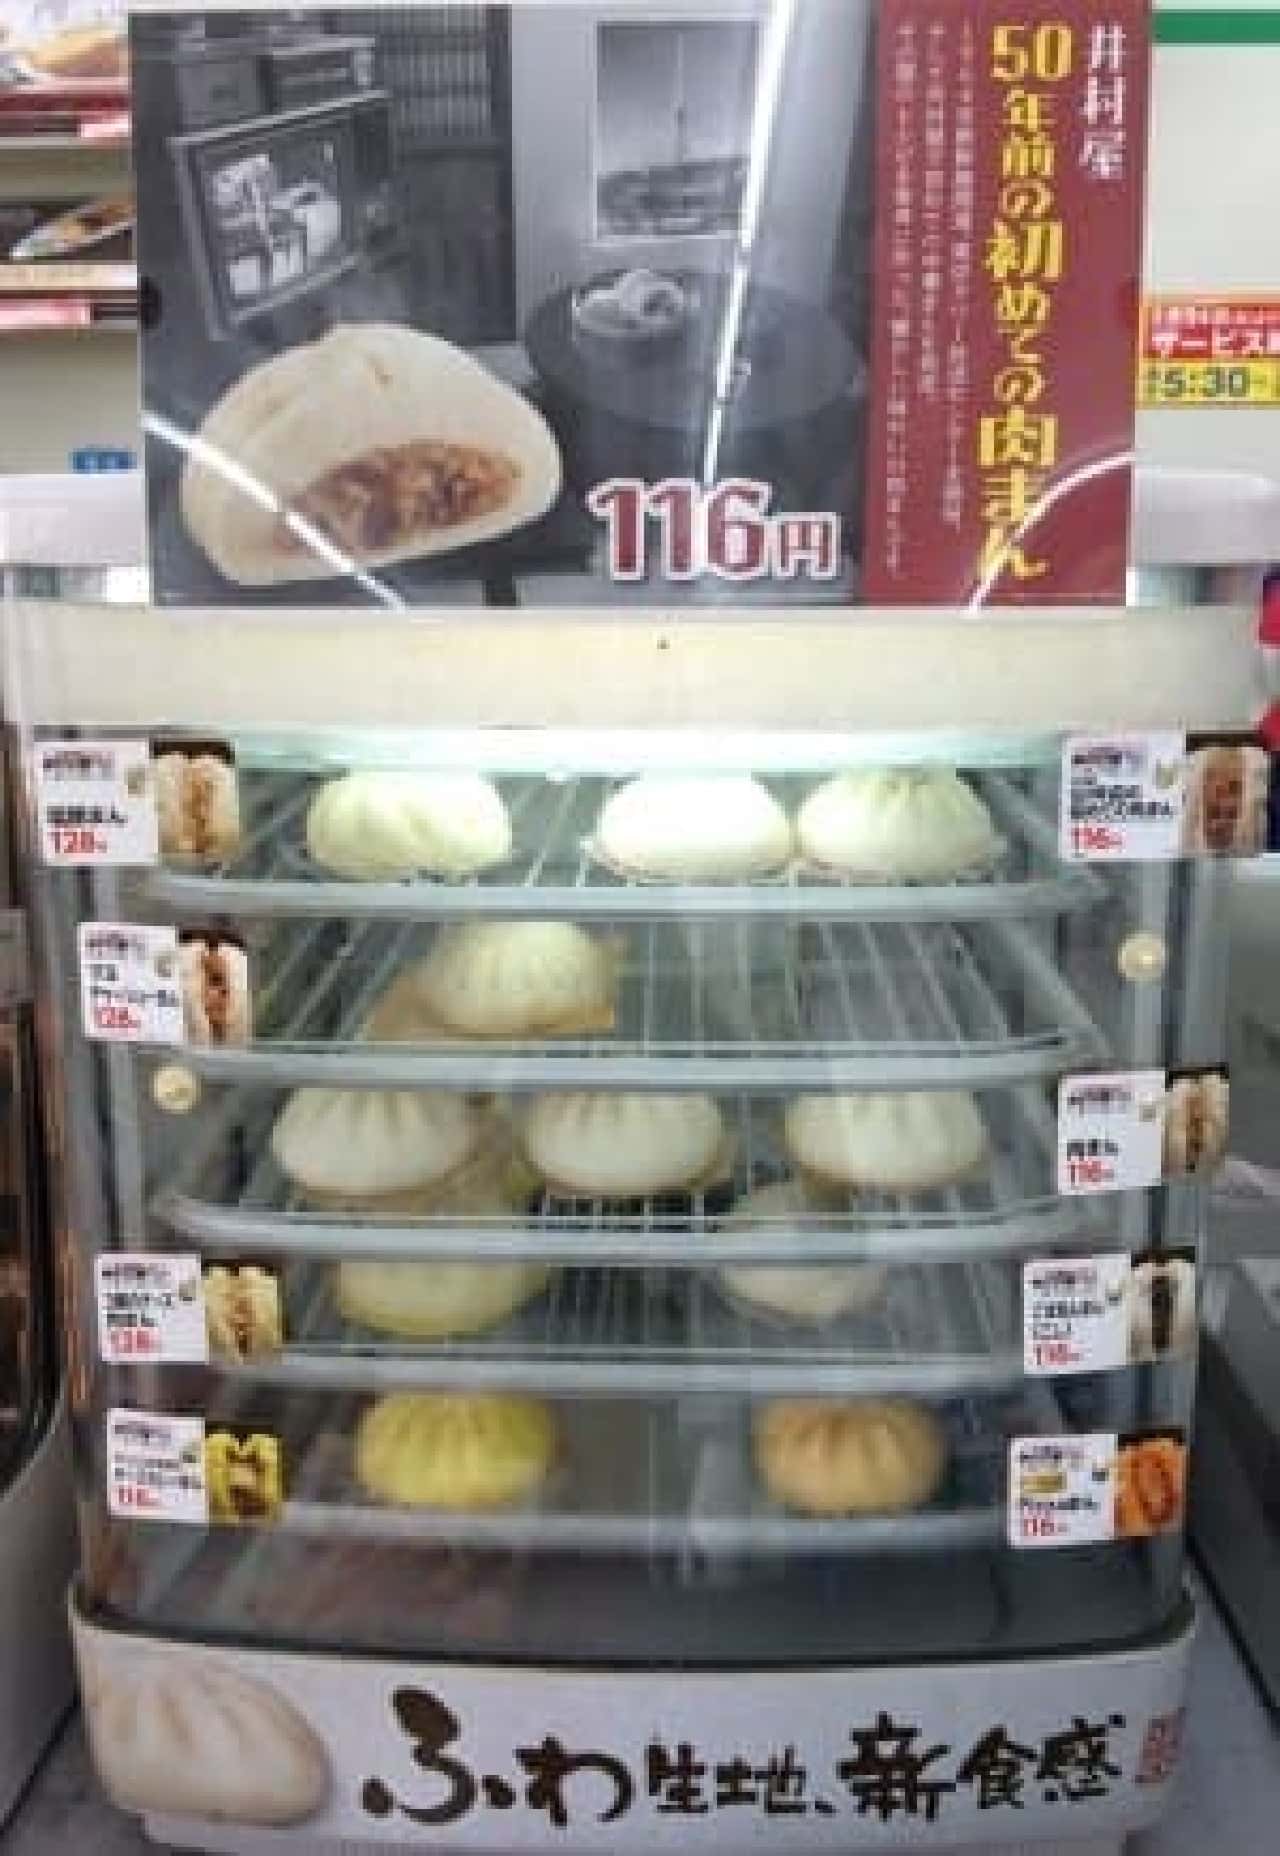 There was! Meat bun 50 years ago!